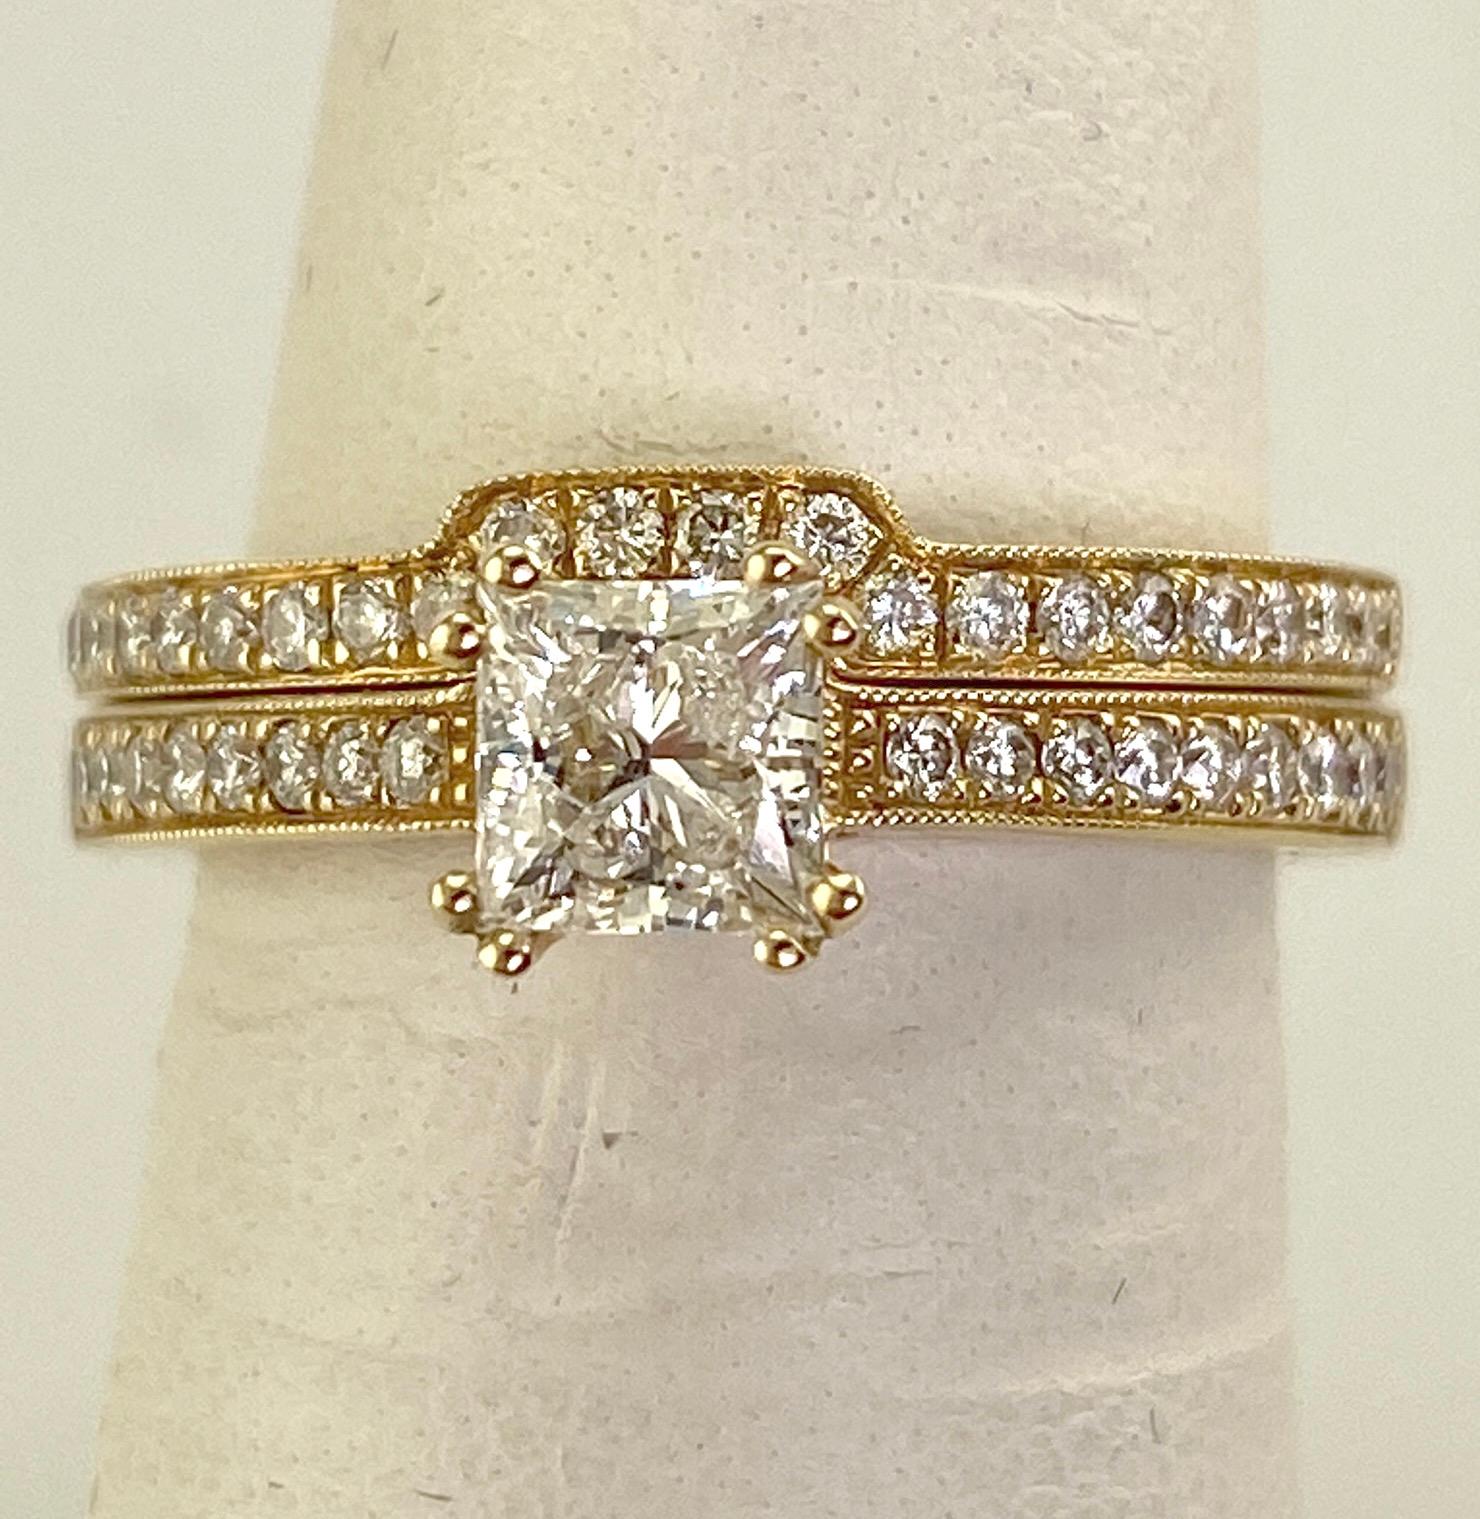 Modern Women's Two Piece Diamond Wedding Set Consisting of a Center Princess Cut Weighing .72 carat. The Quality is SI2; G. Additional Round Diamonds are Set in a Single Row Along the Sides Bringing the Total Weight to 1.09 Carat. The Quality Ranges